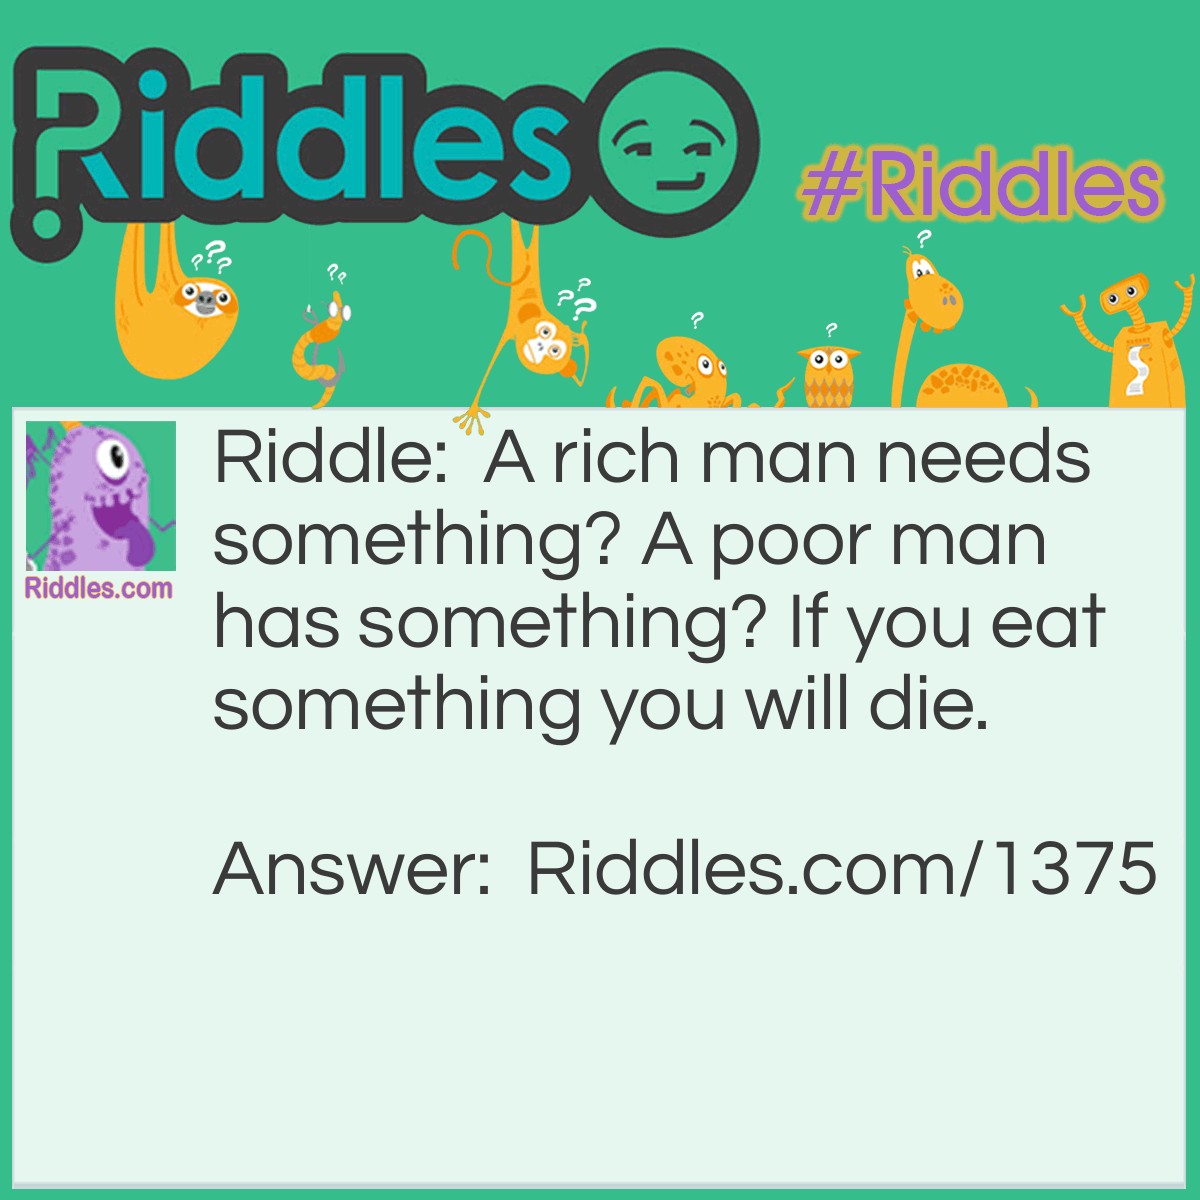 Riddle: A rich man needs something? A poor man has something? If you eat something you will die. What is it? Answer: nothing, because a rich man neeeds nothing, a poor man has nothing and if you eat nothing you'll die.